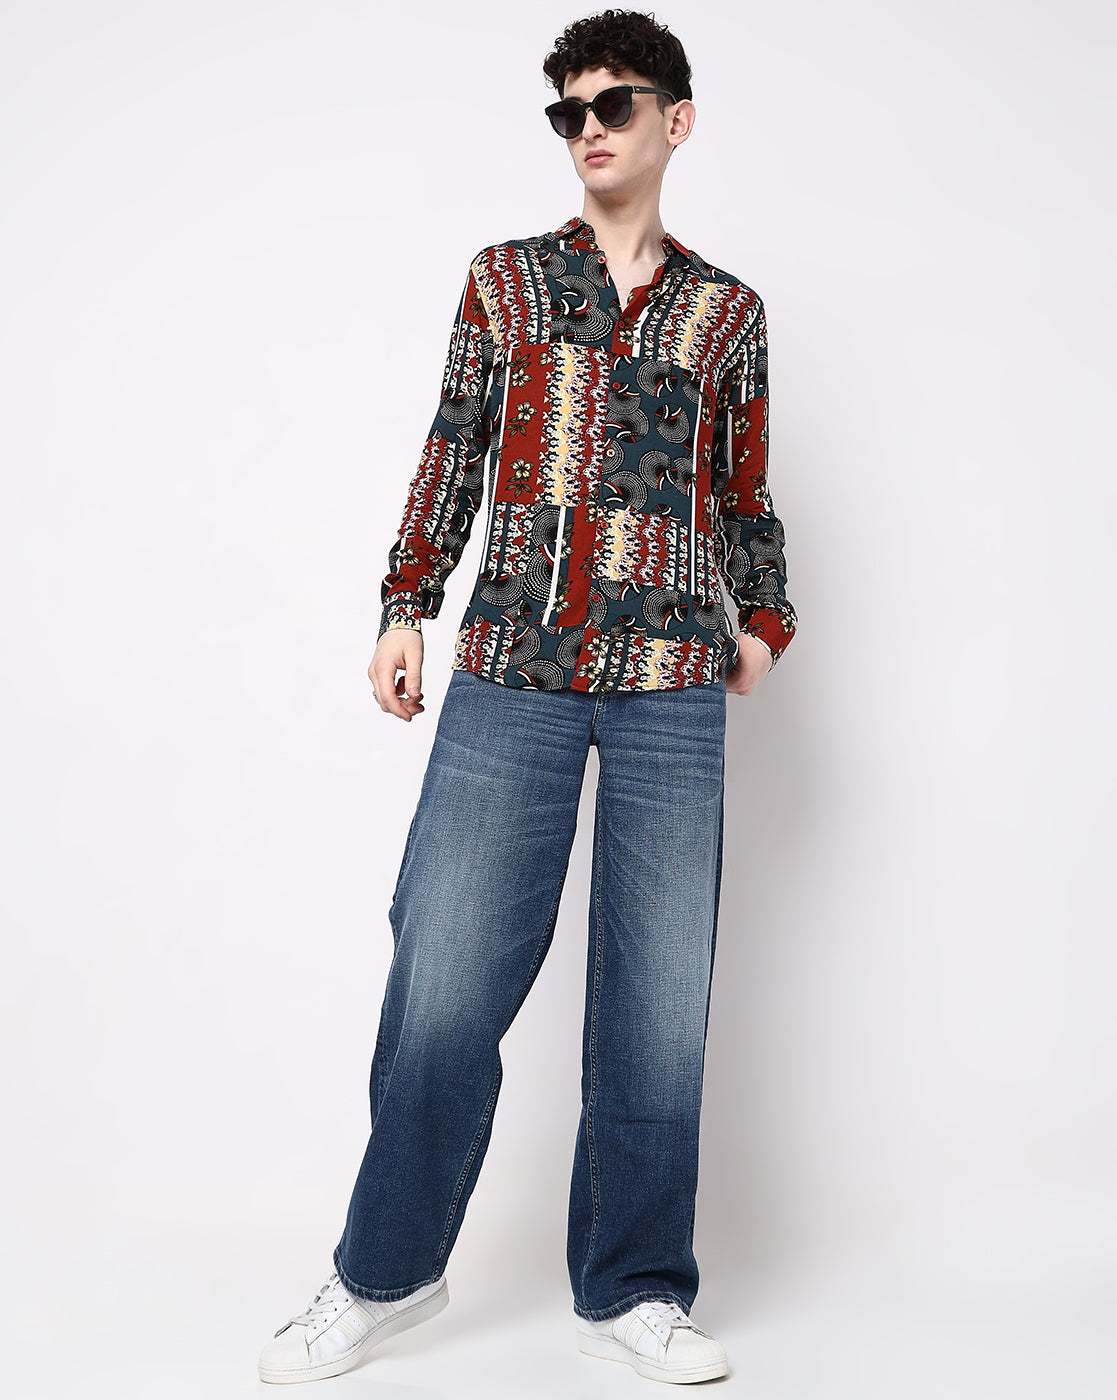 Multicolored Full Abstract Print Rayon Full Sleeve Shirt